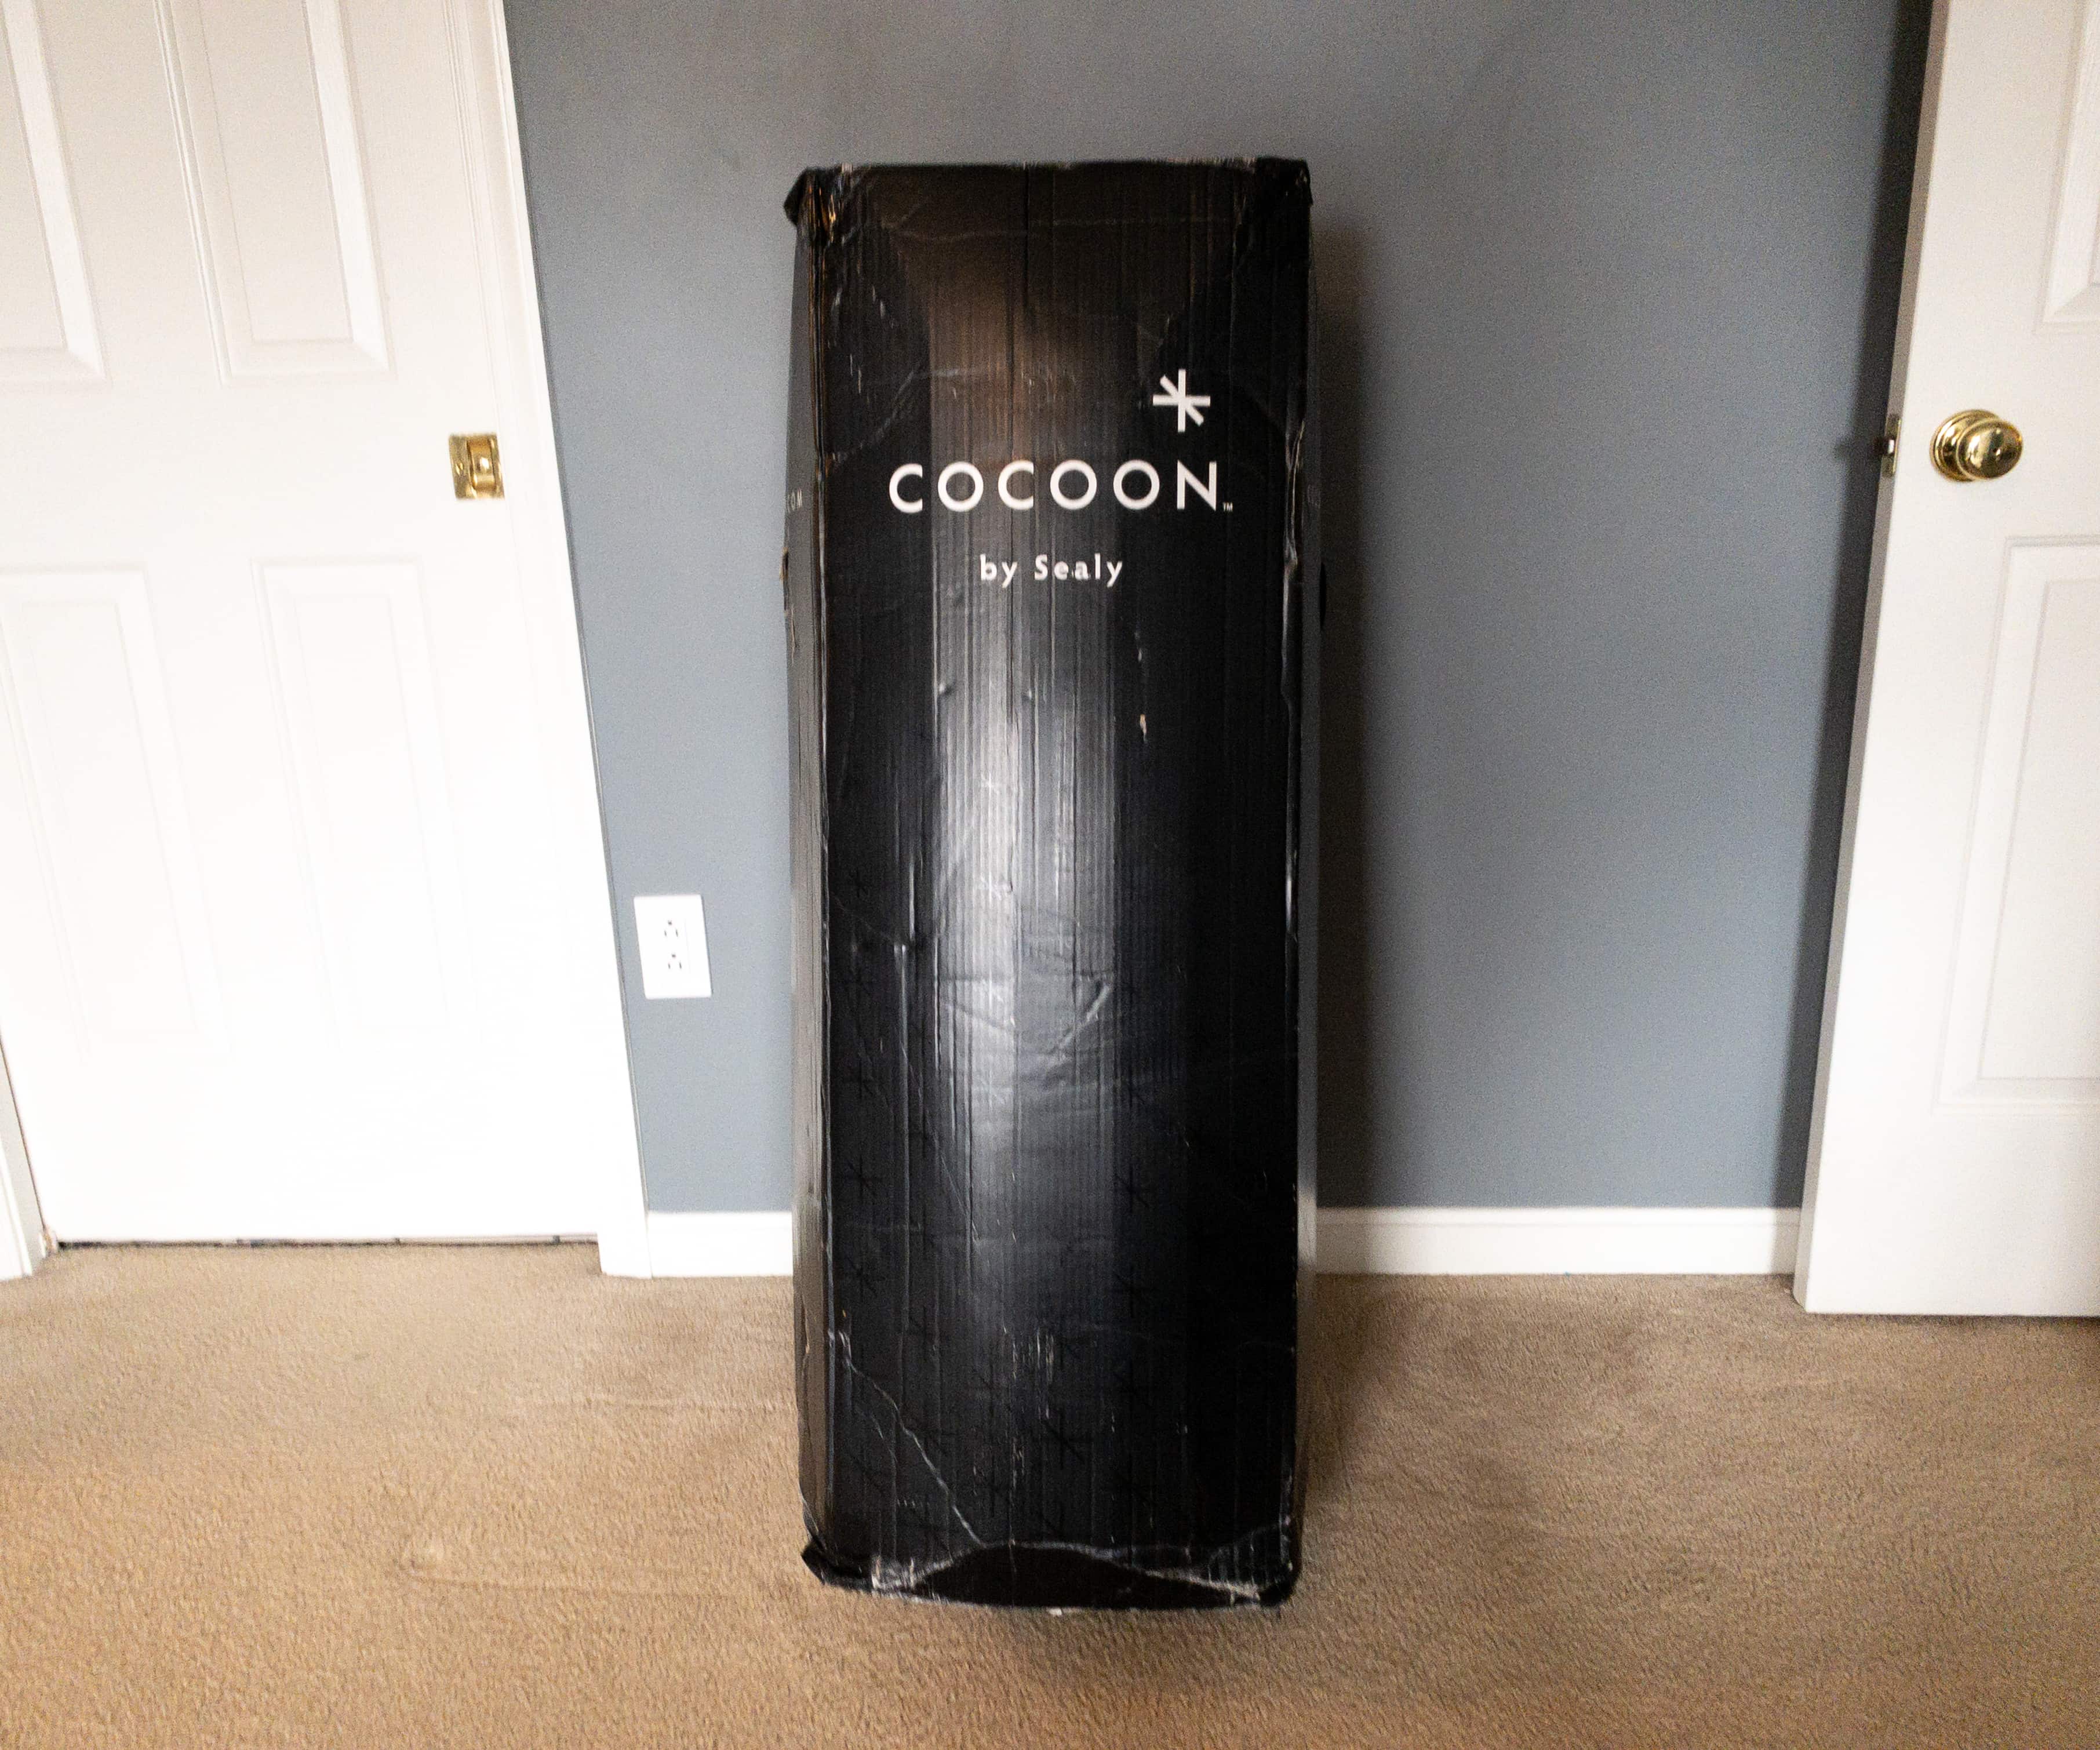 is cocoon by sealy a good mattress